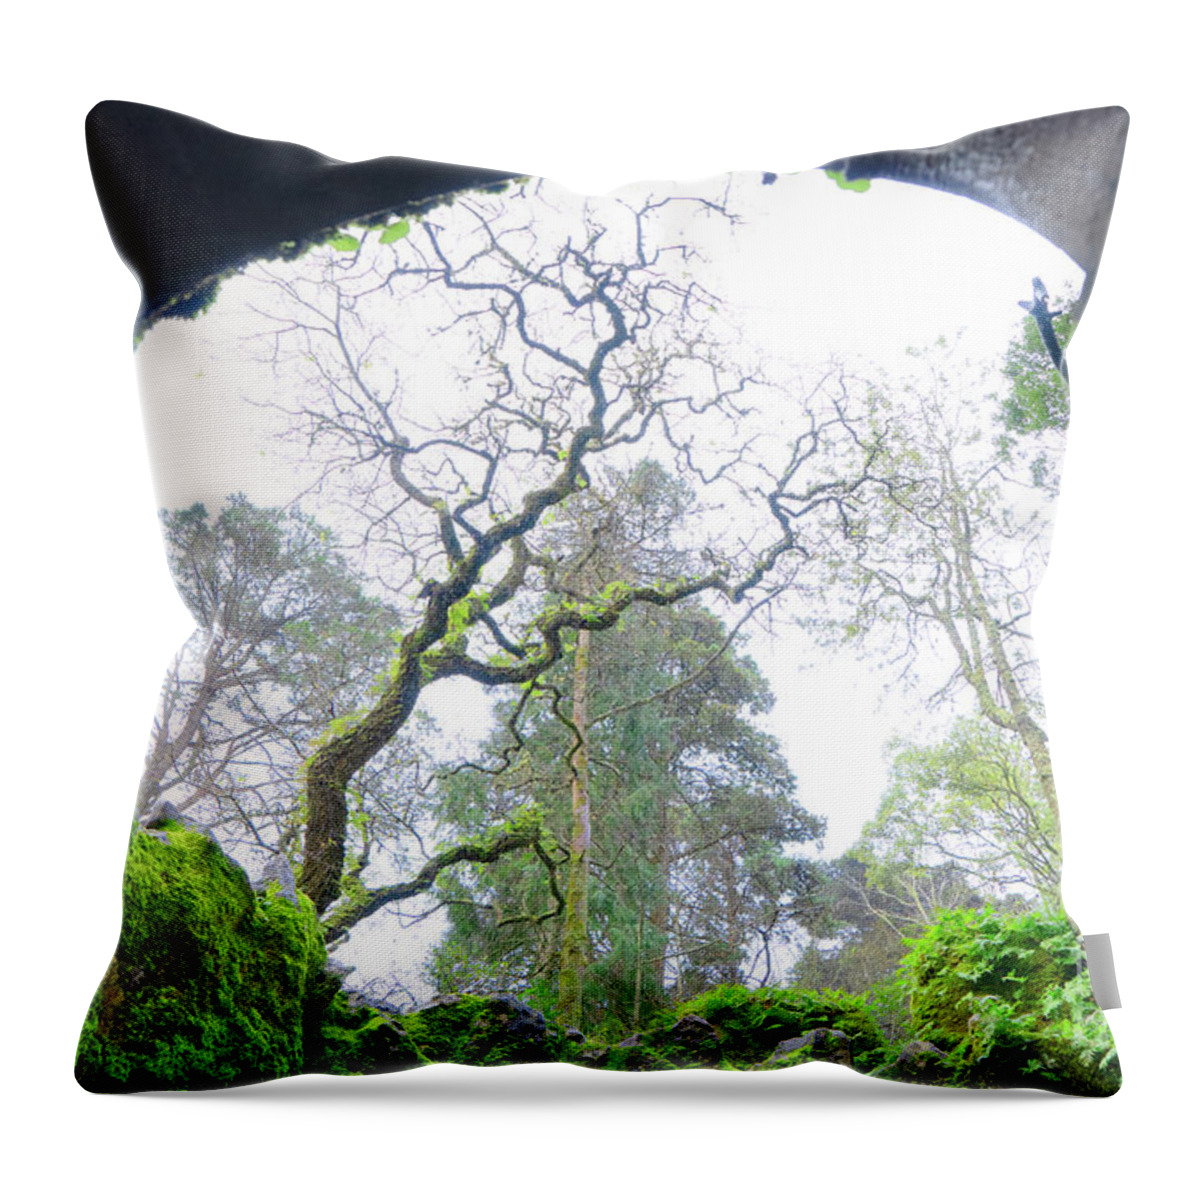 Sintra Throw Pillow featuring the photograph The Initiation Well by Anastasy Yarmolovich